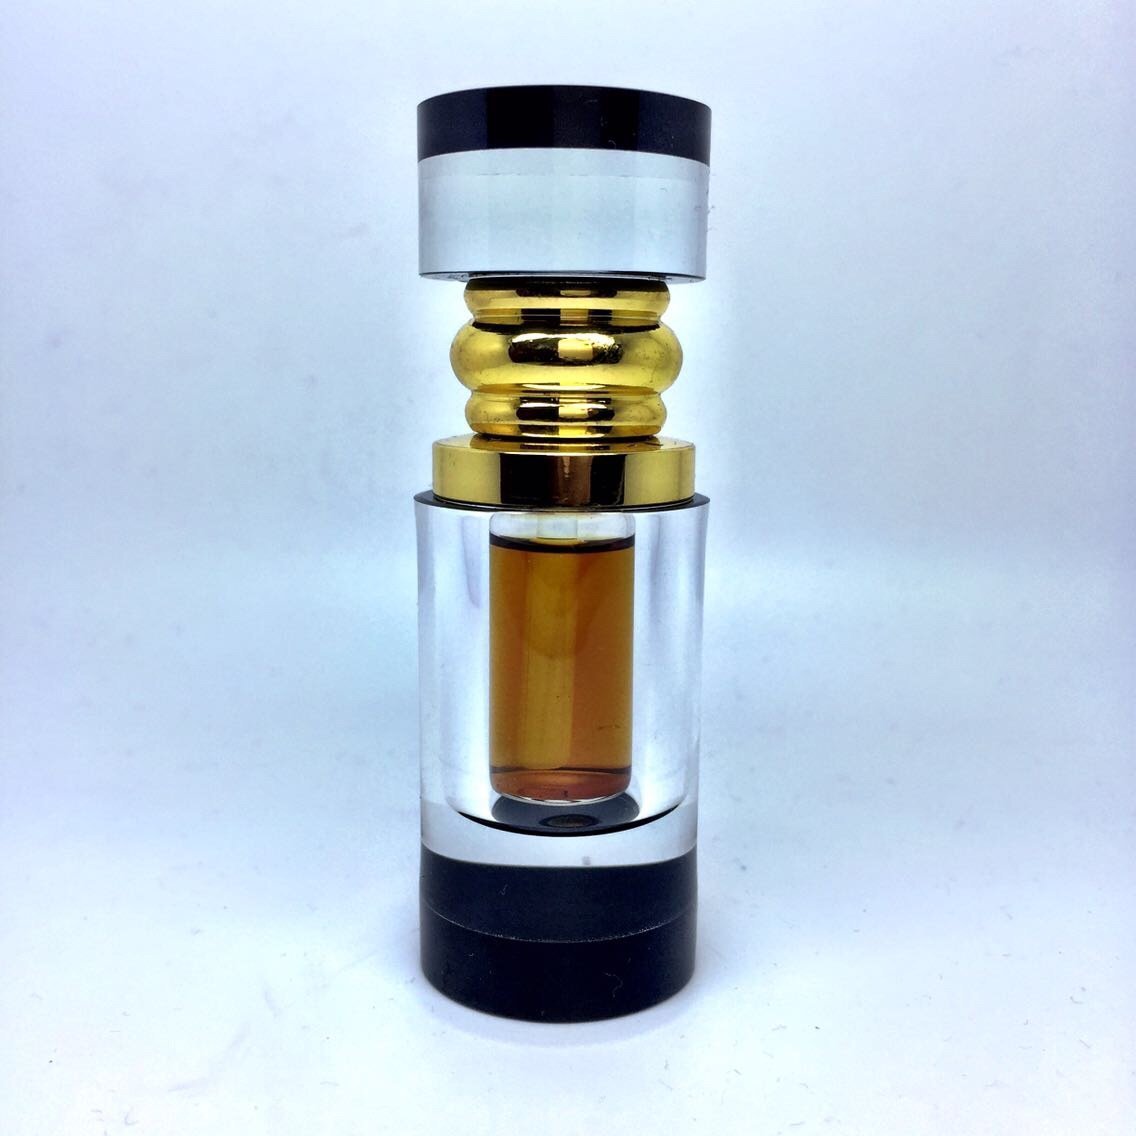 Zz-Sold out-Zz Specialty 100% Pure Super Woody Scent Taran Wild Agarwood (Oud) Oil - Steam Distillation Good Resinous Agarwood - 3ml K9 Crystal Cylinder